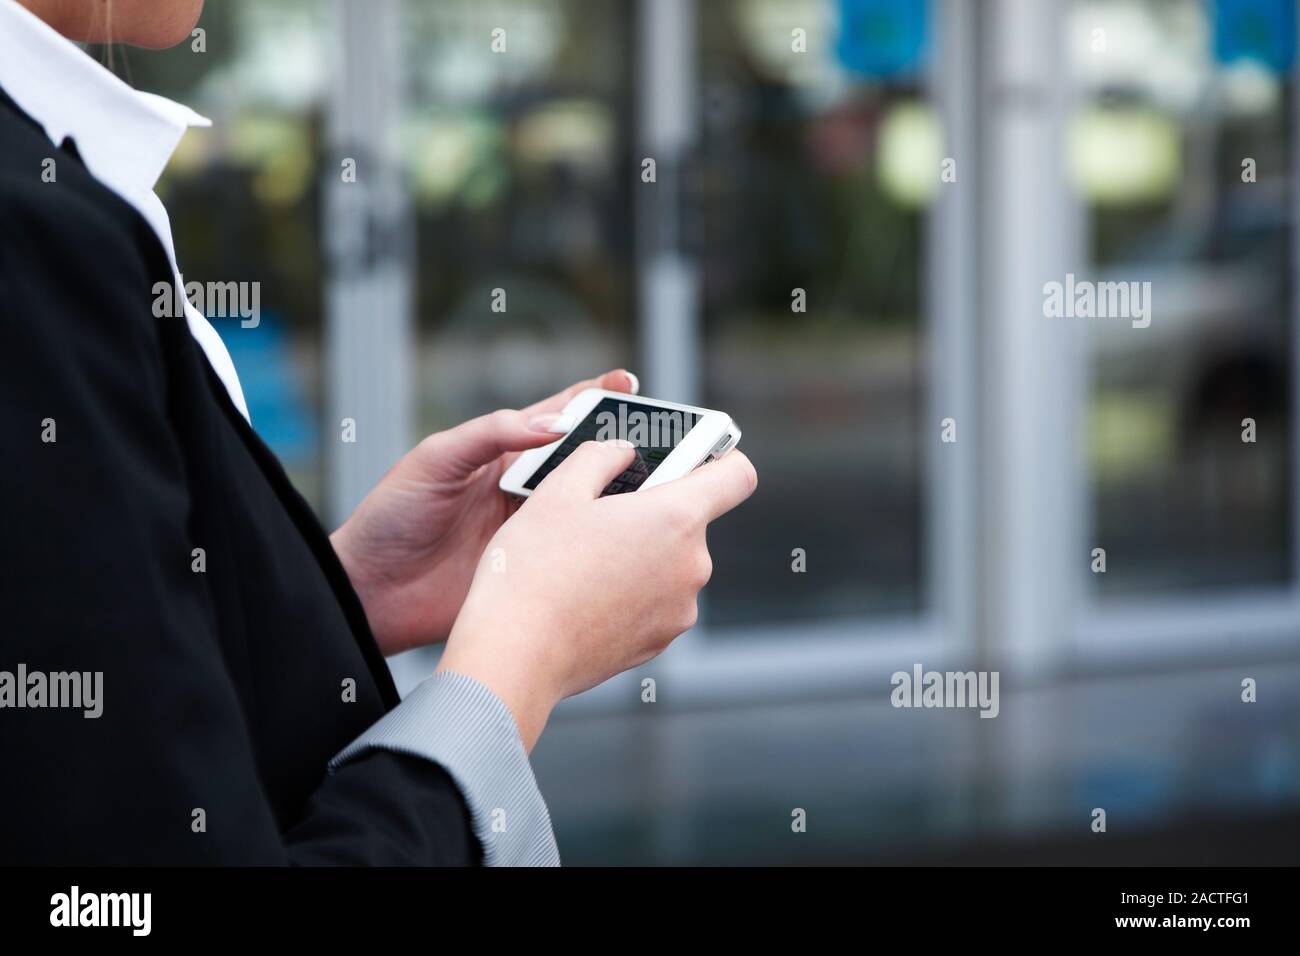 Woman writes an SMS with her mobile phone Stock Photo